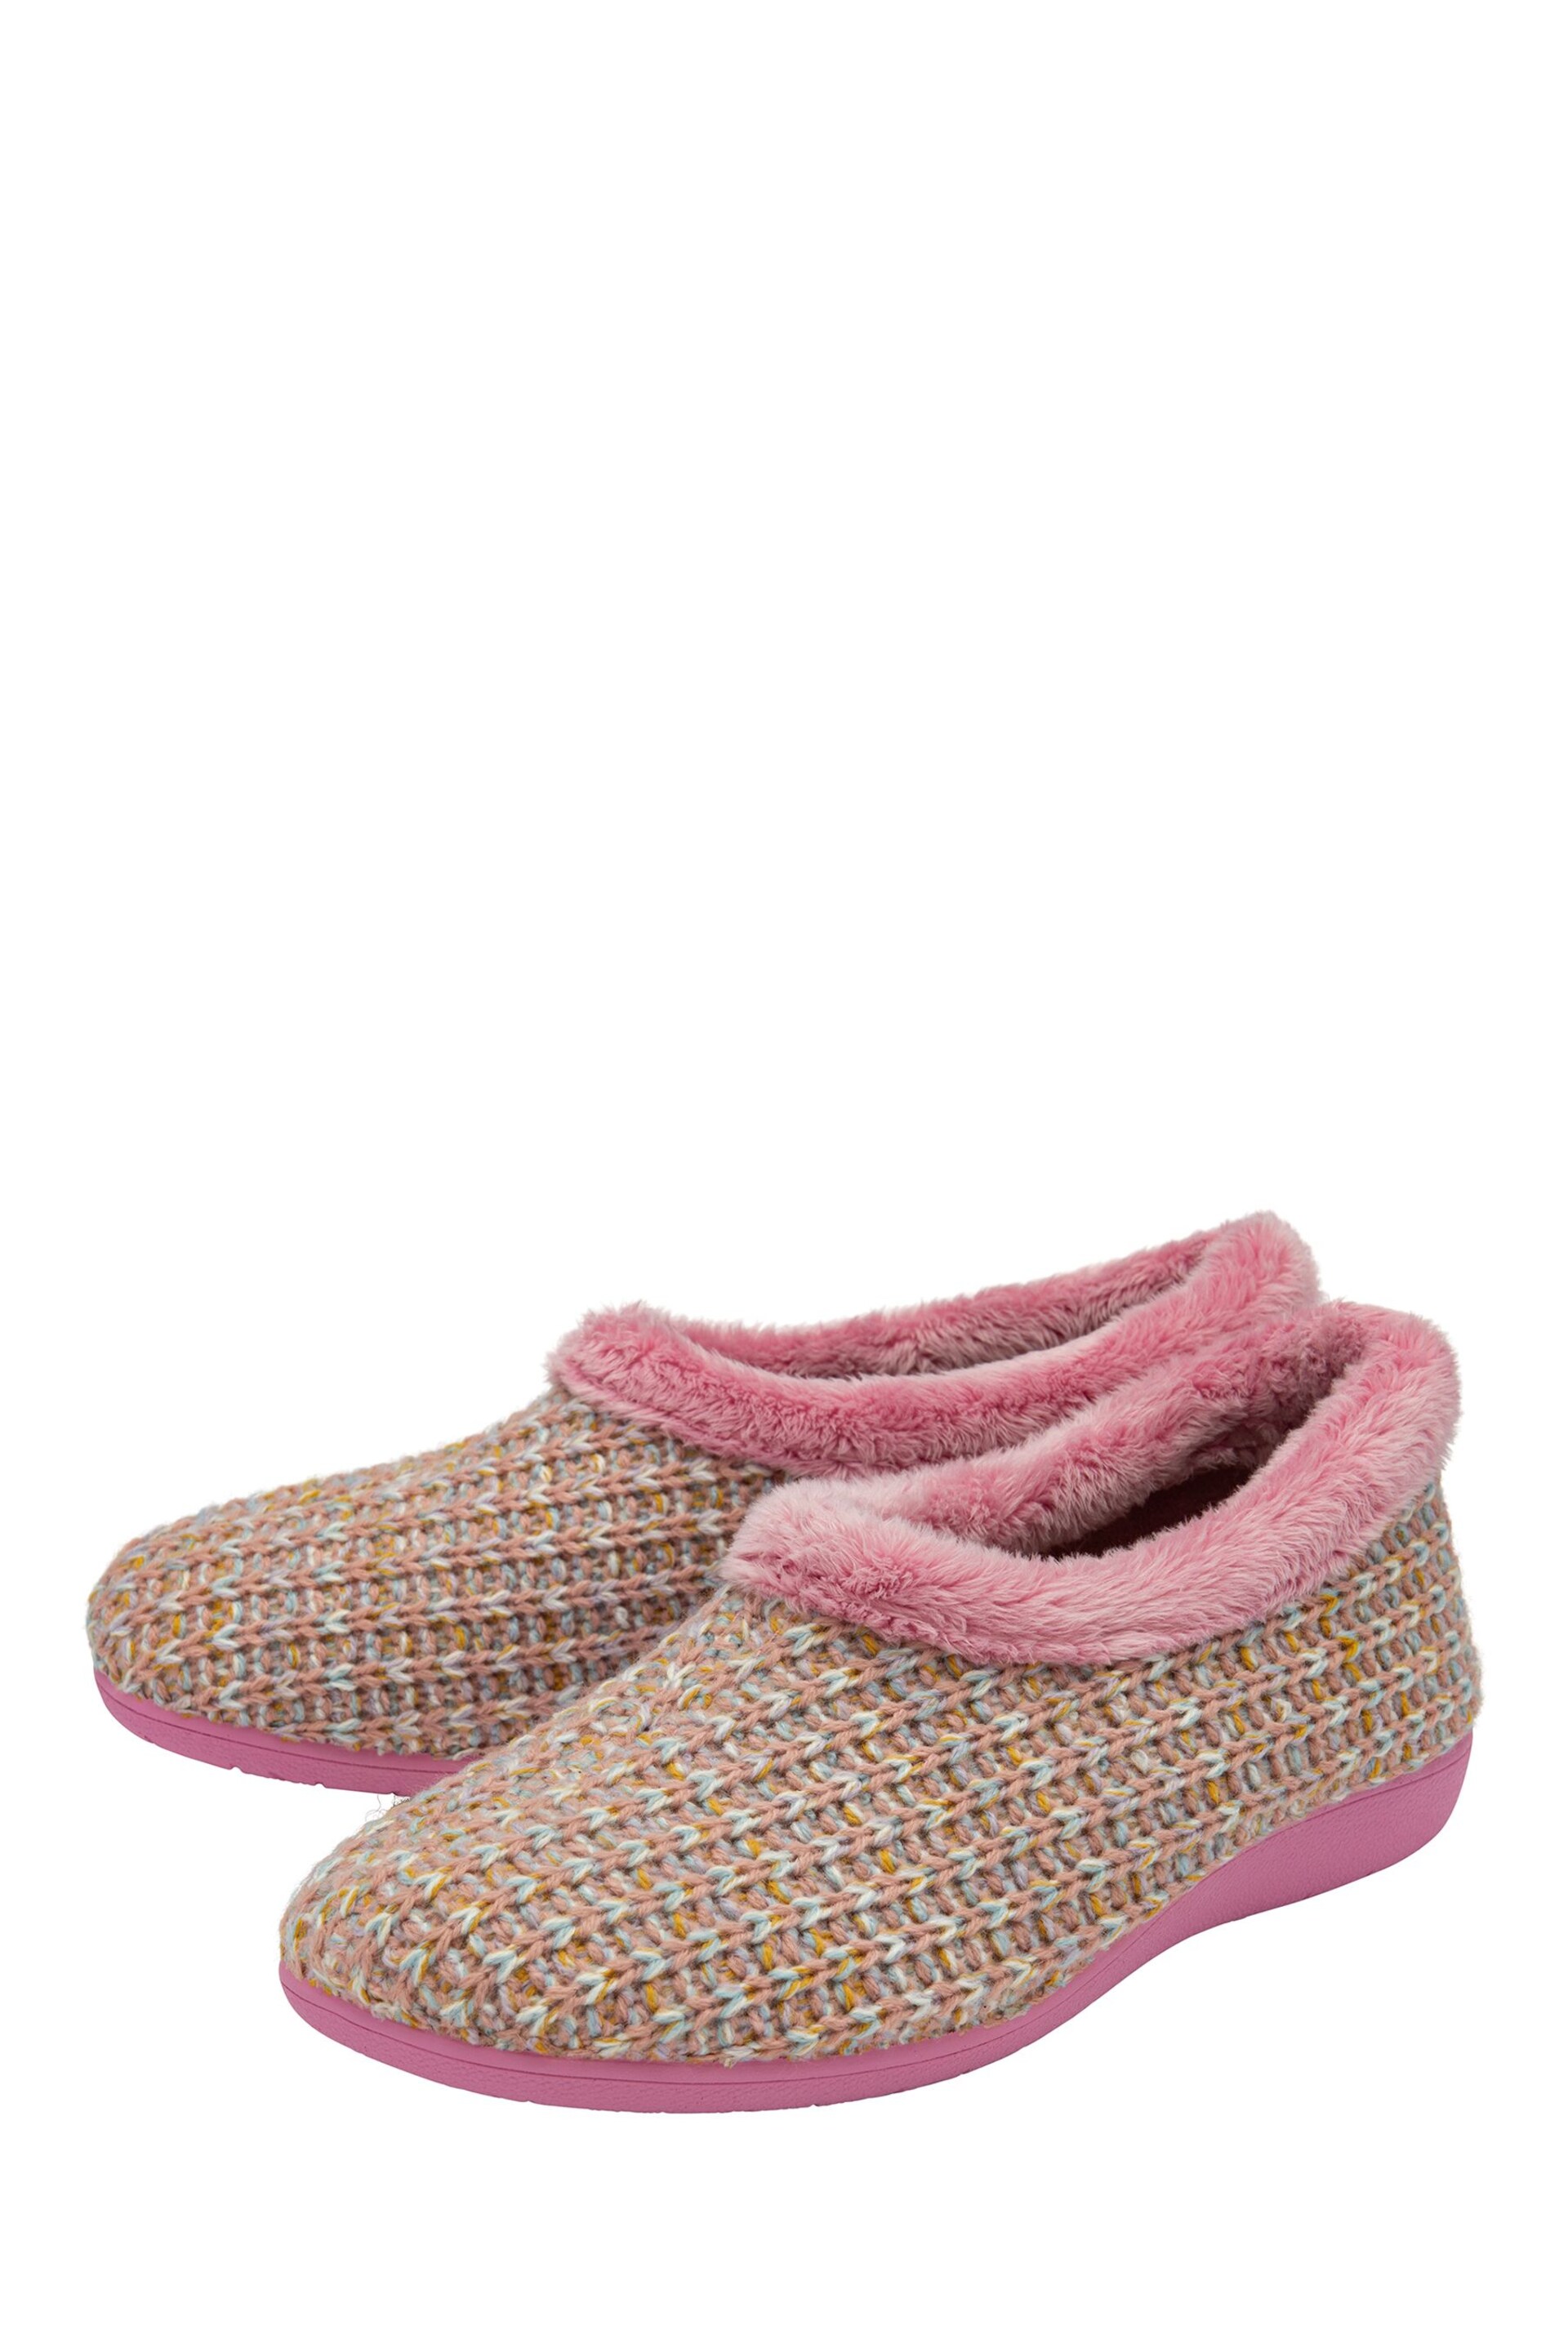 Lotus Pink Knitted Flat Slippers - Image 2 of 4